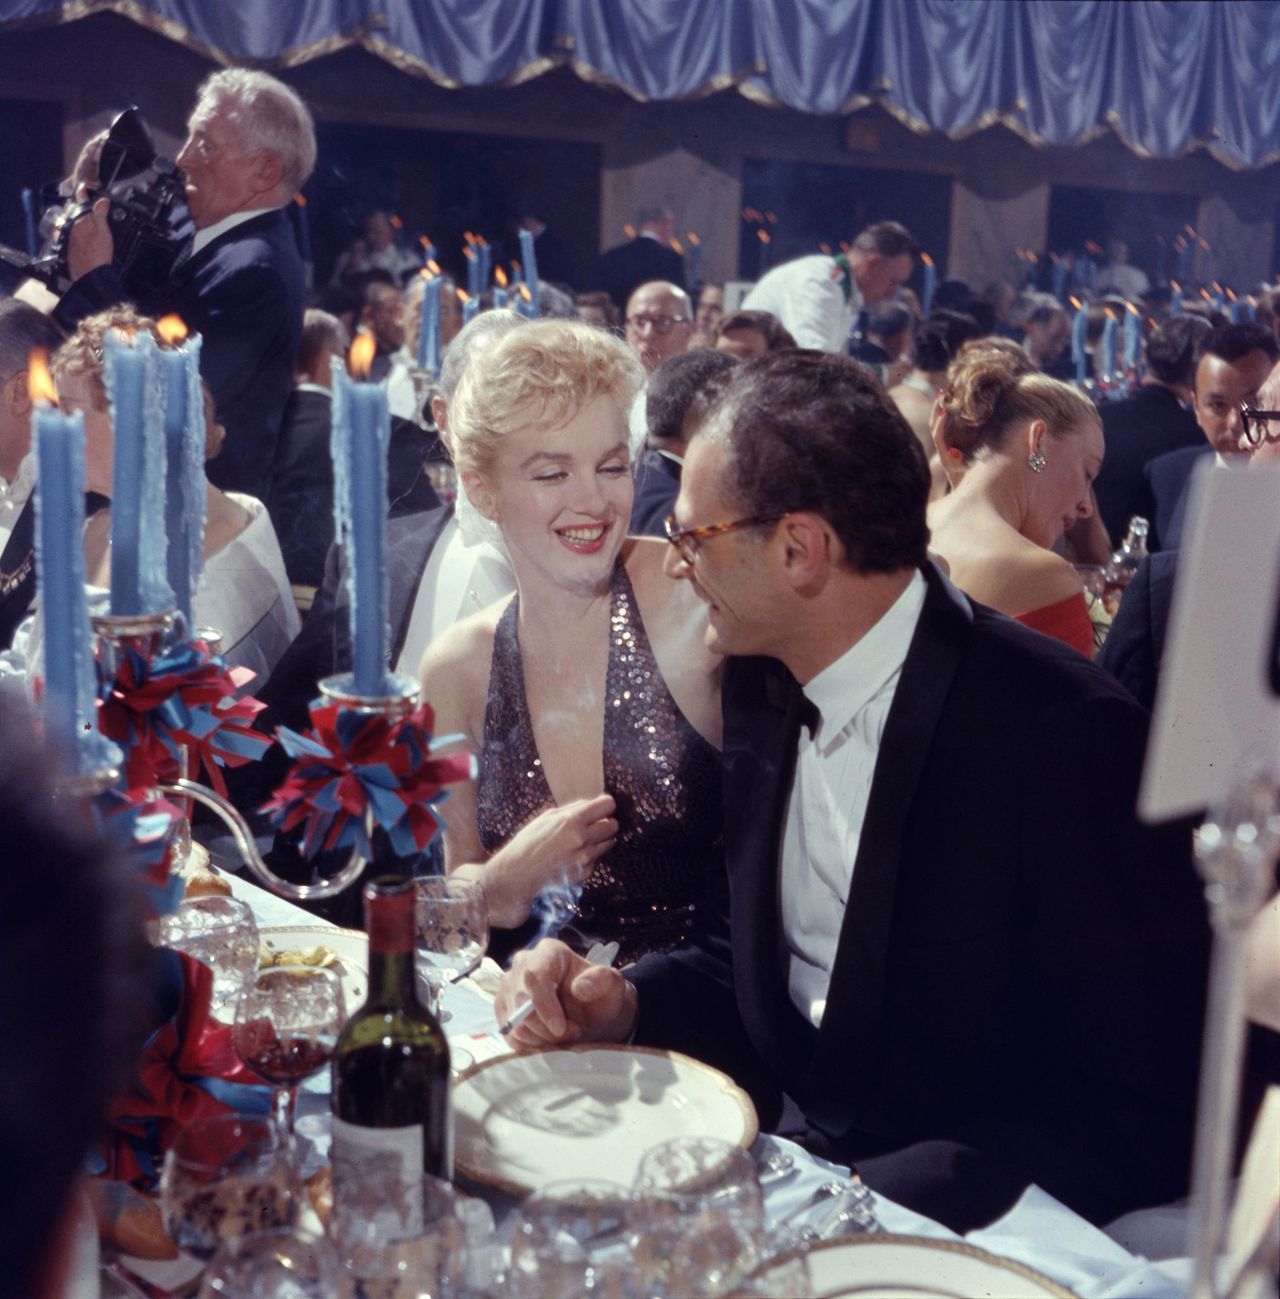 Marilyn Monroe and Arthur Miller attending the April in Paris ball, at the Waldorf-Astoria in Manhattan, New York on April 11, 1957.